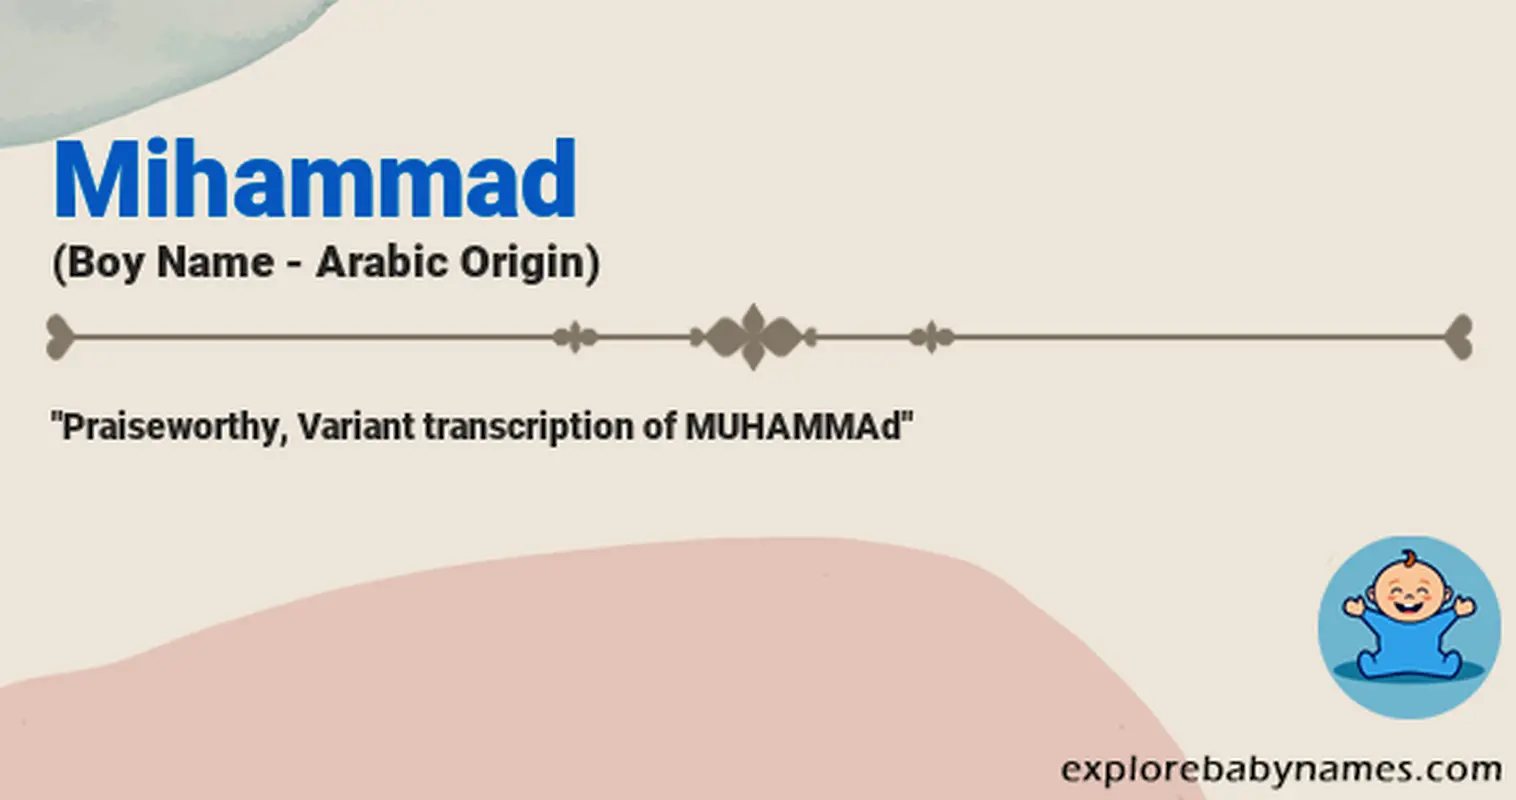 Meaning of Mihammad